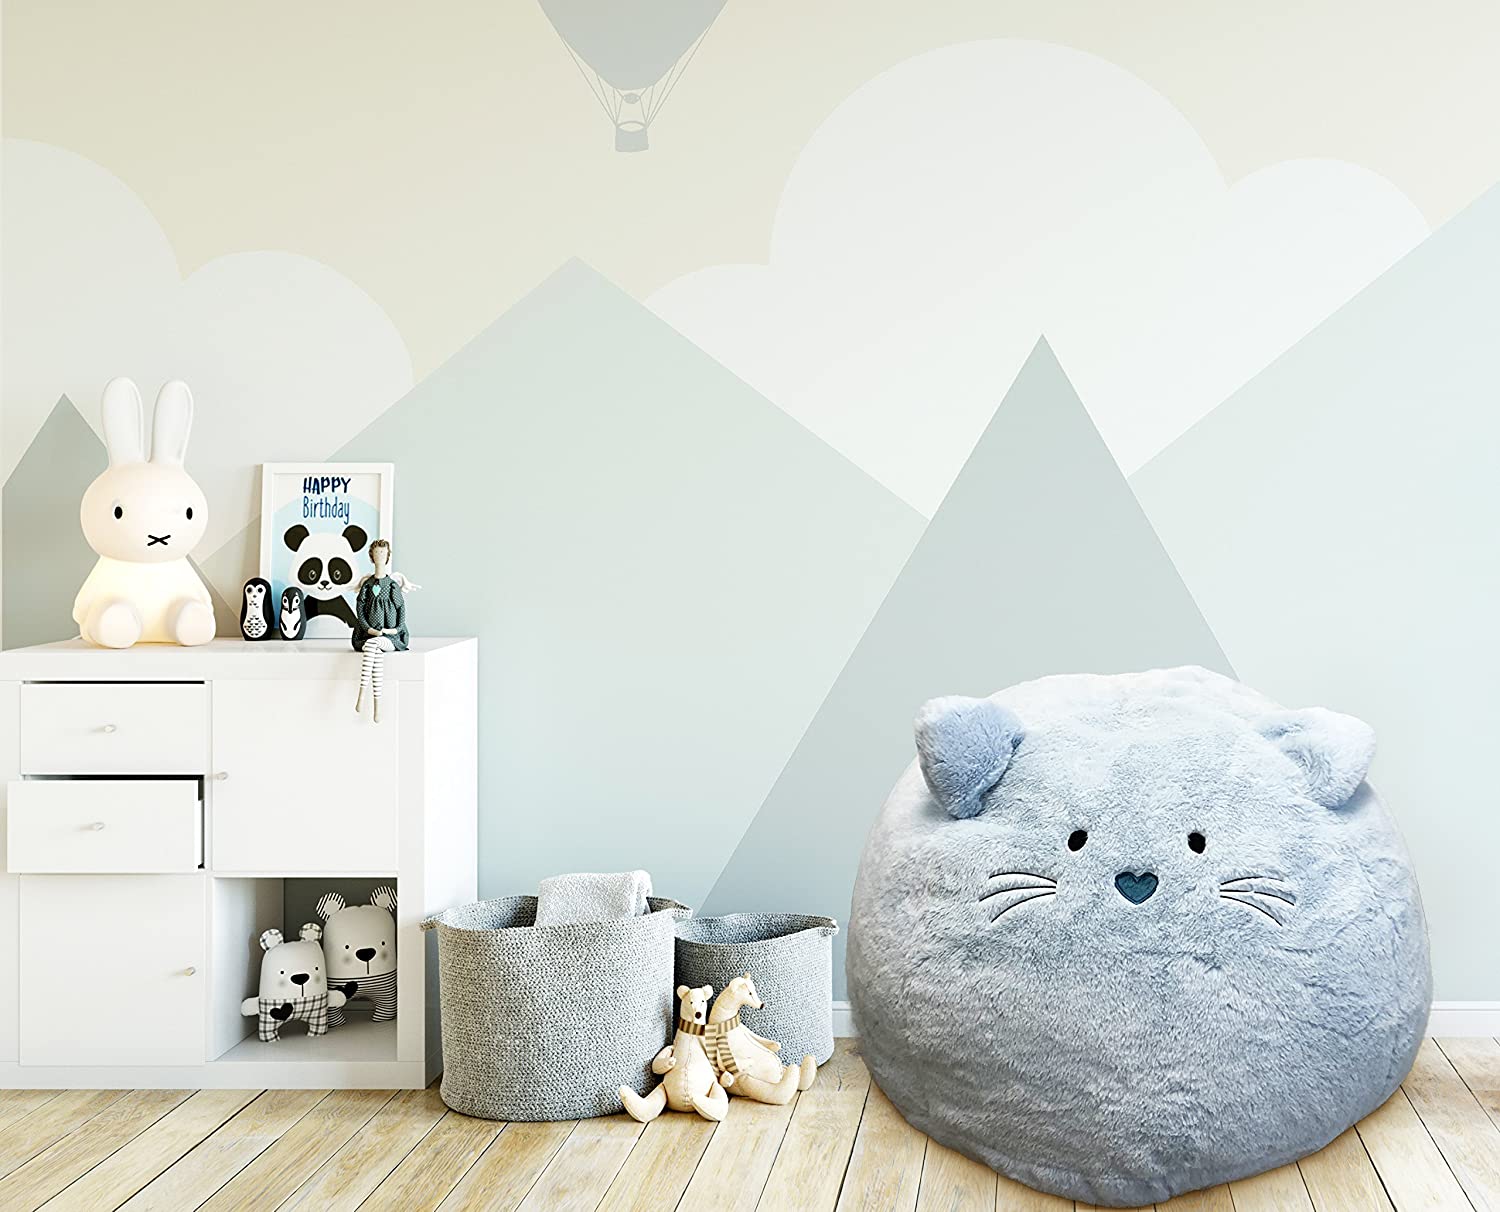 Beanbag For Kids: Soft And Comfortable Stuffed Bean Bag Chair For The Nursery